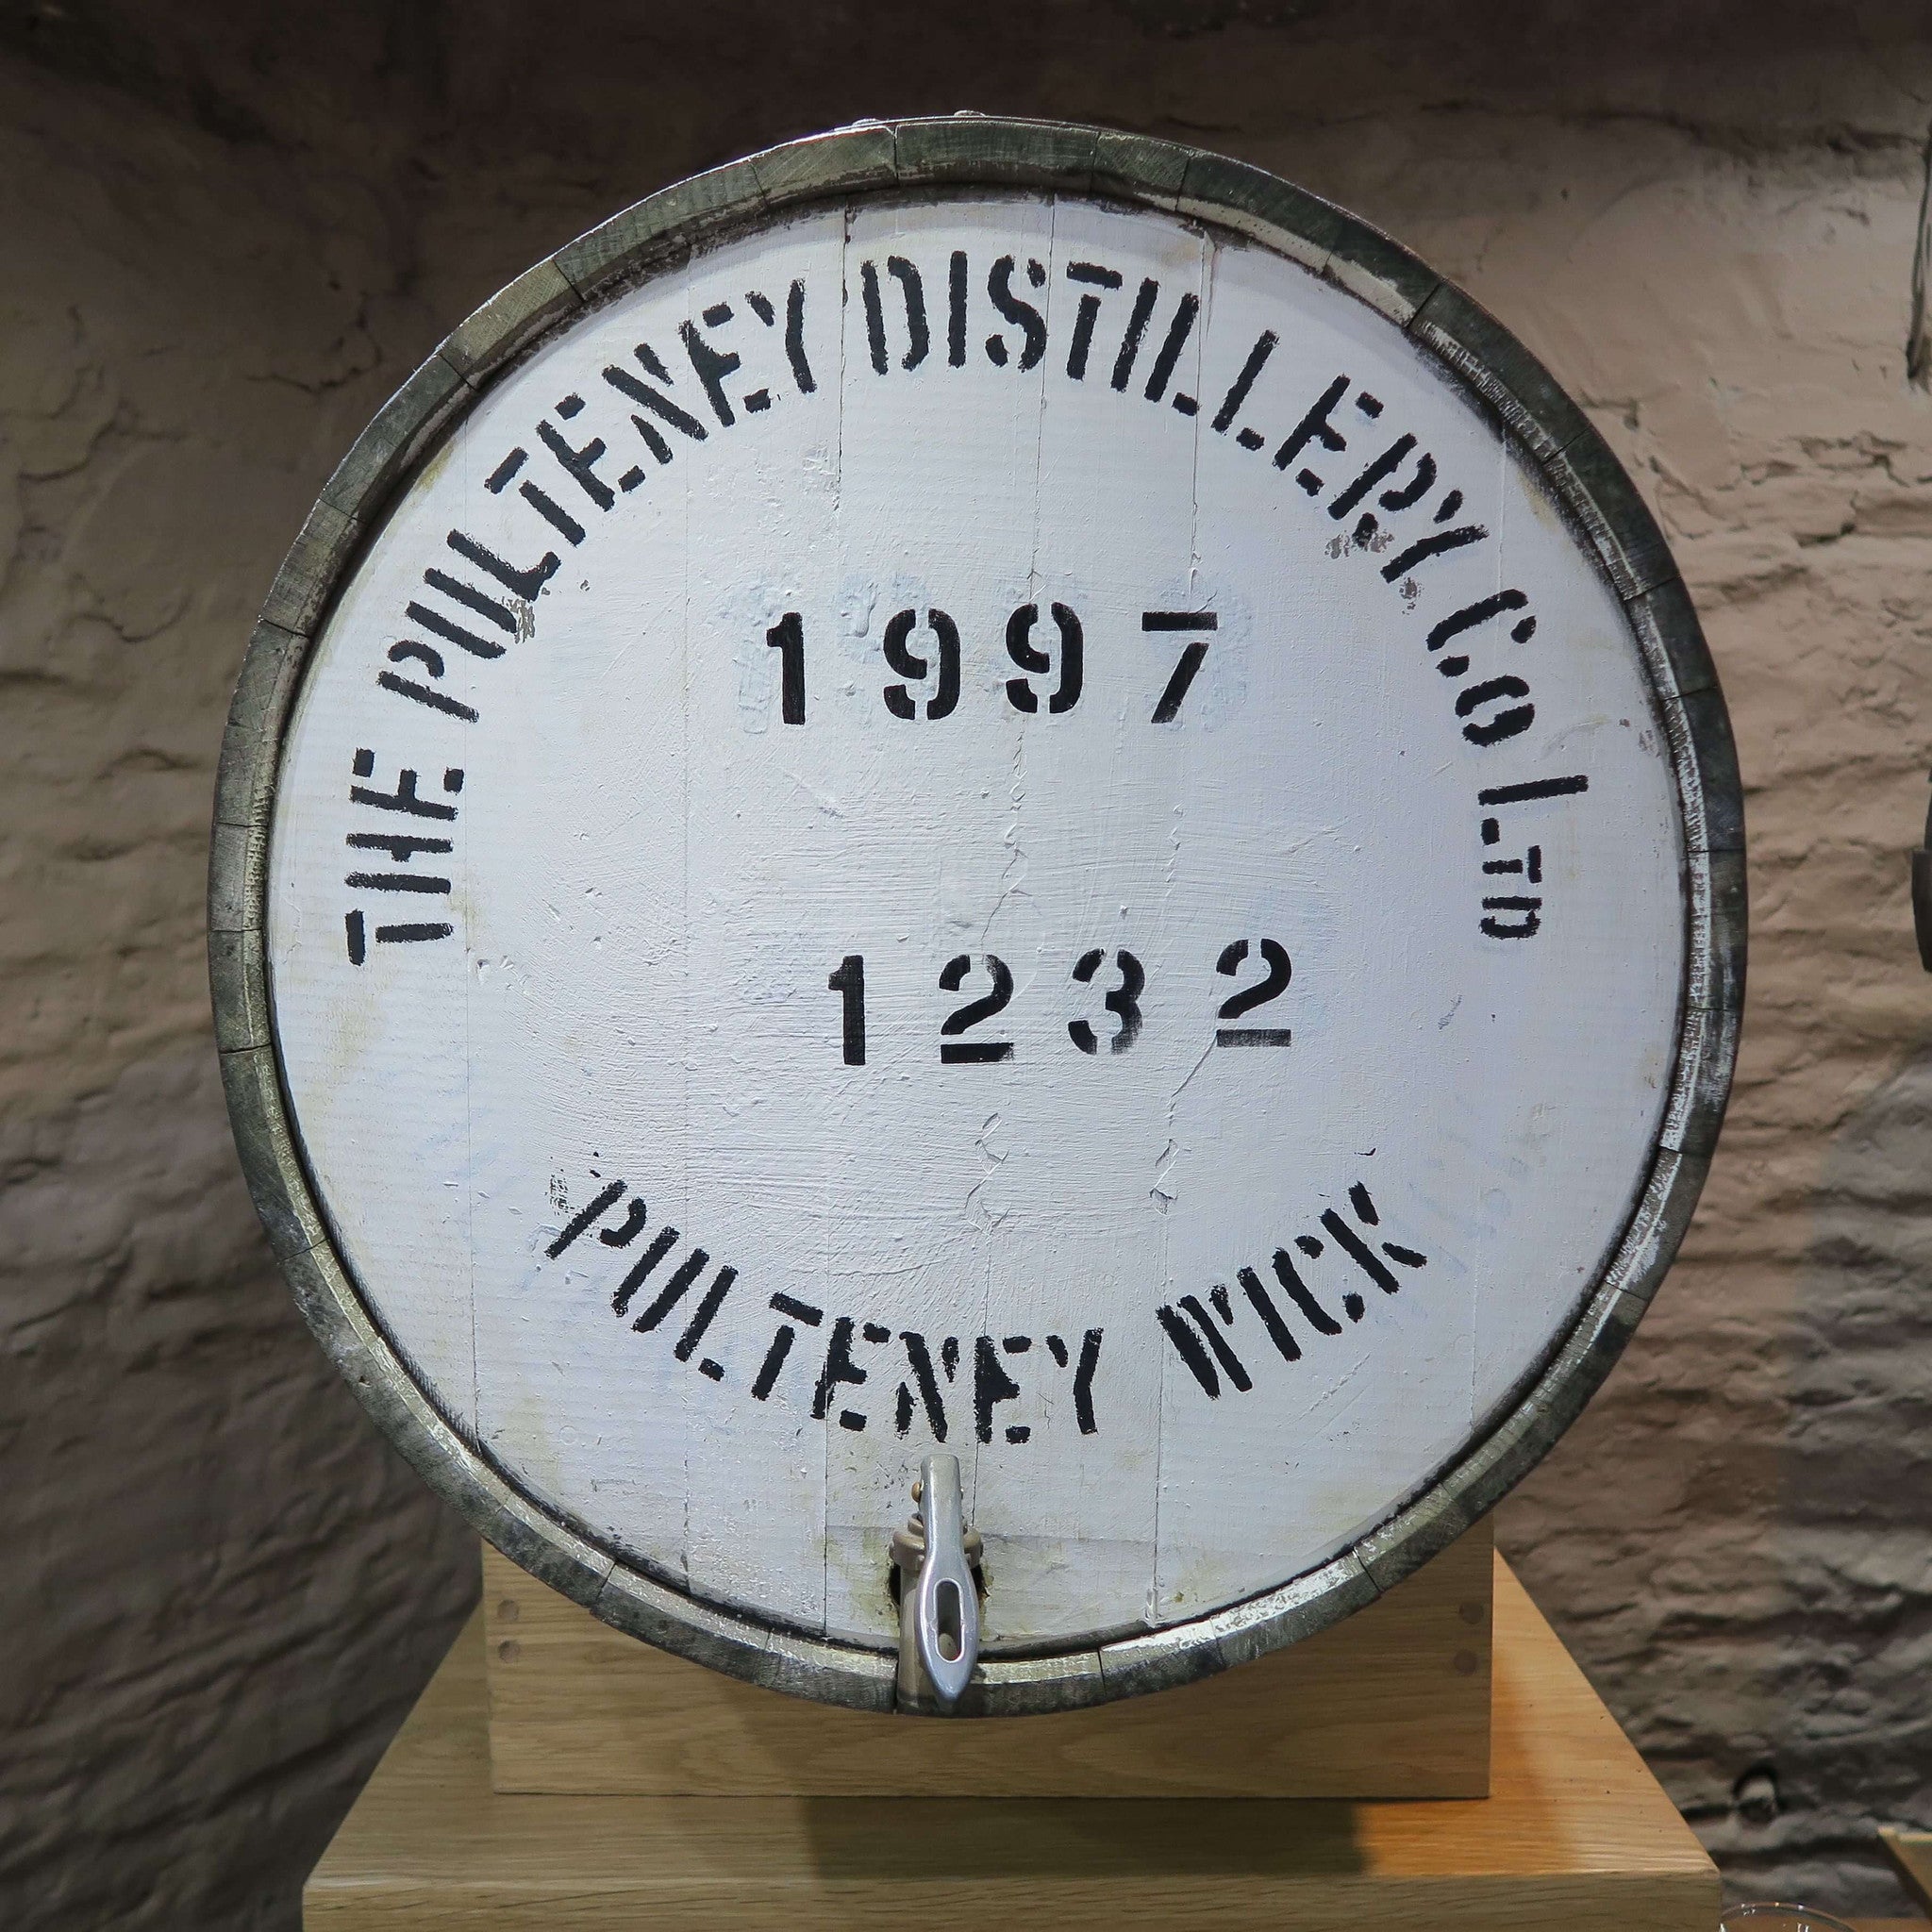 Whisky Distillery Tour - The Pulteney Distillery